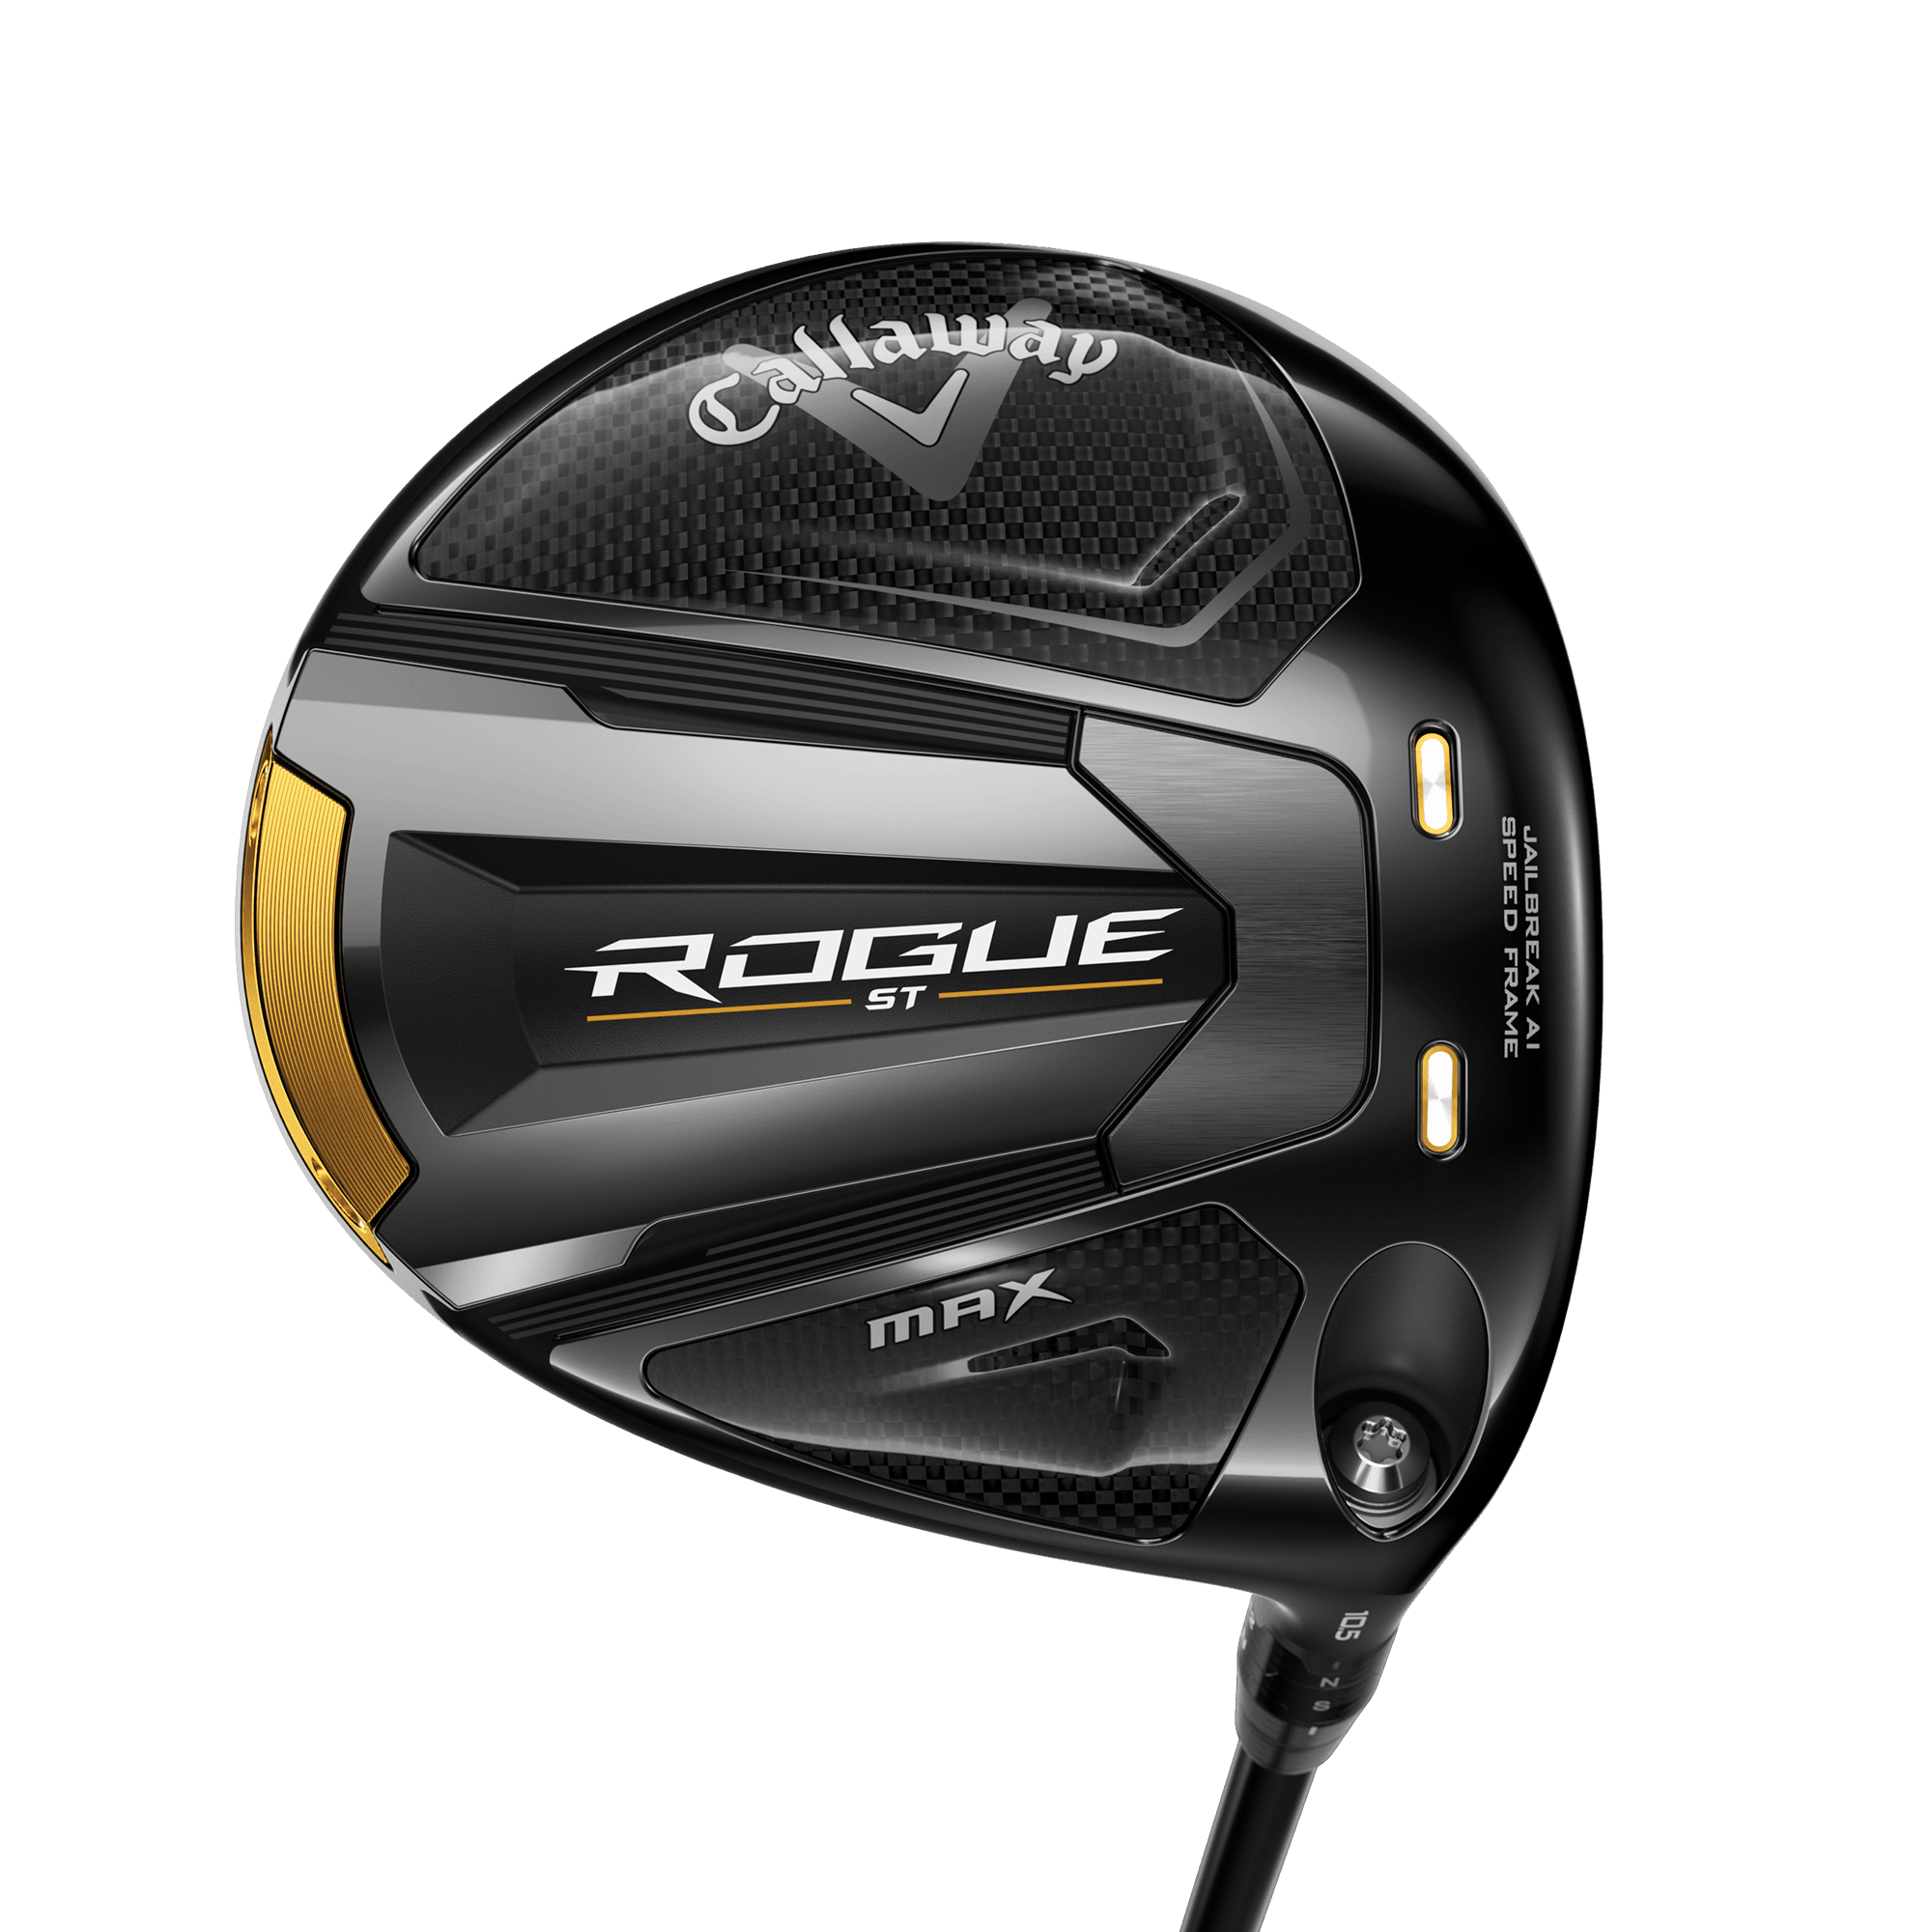 Rogue ST MAX Drivers | Callaway Golf Pre-Owned | yhk5553464 